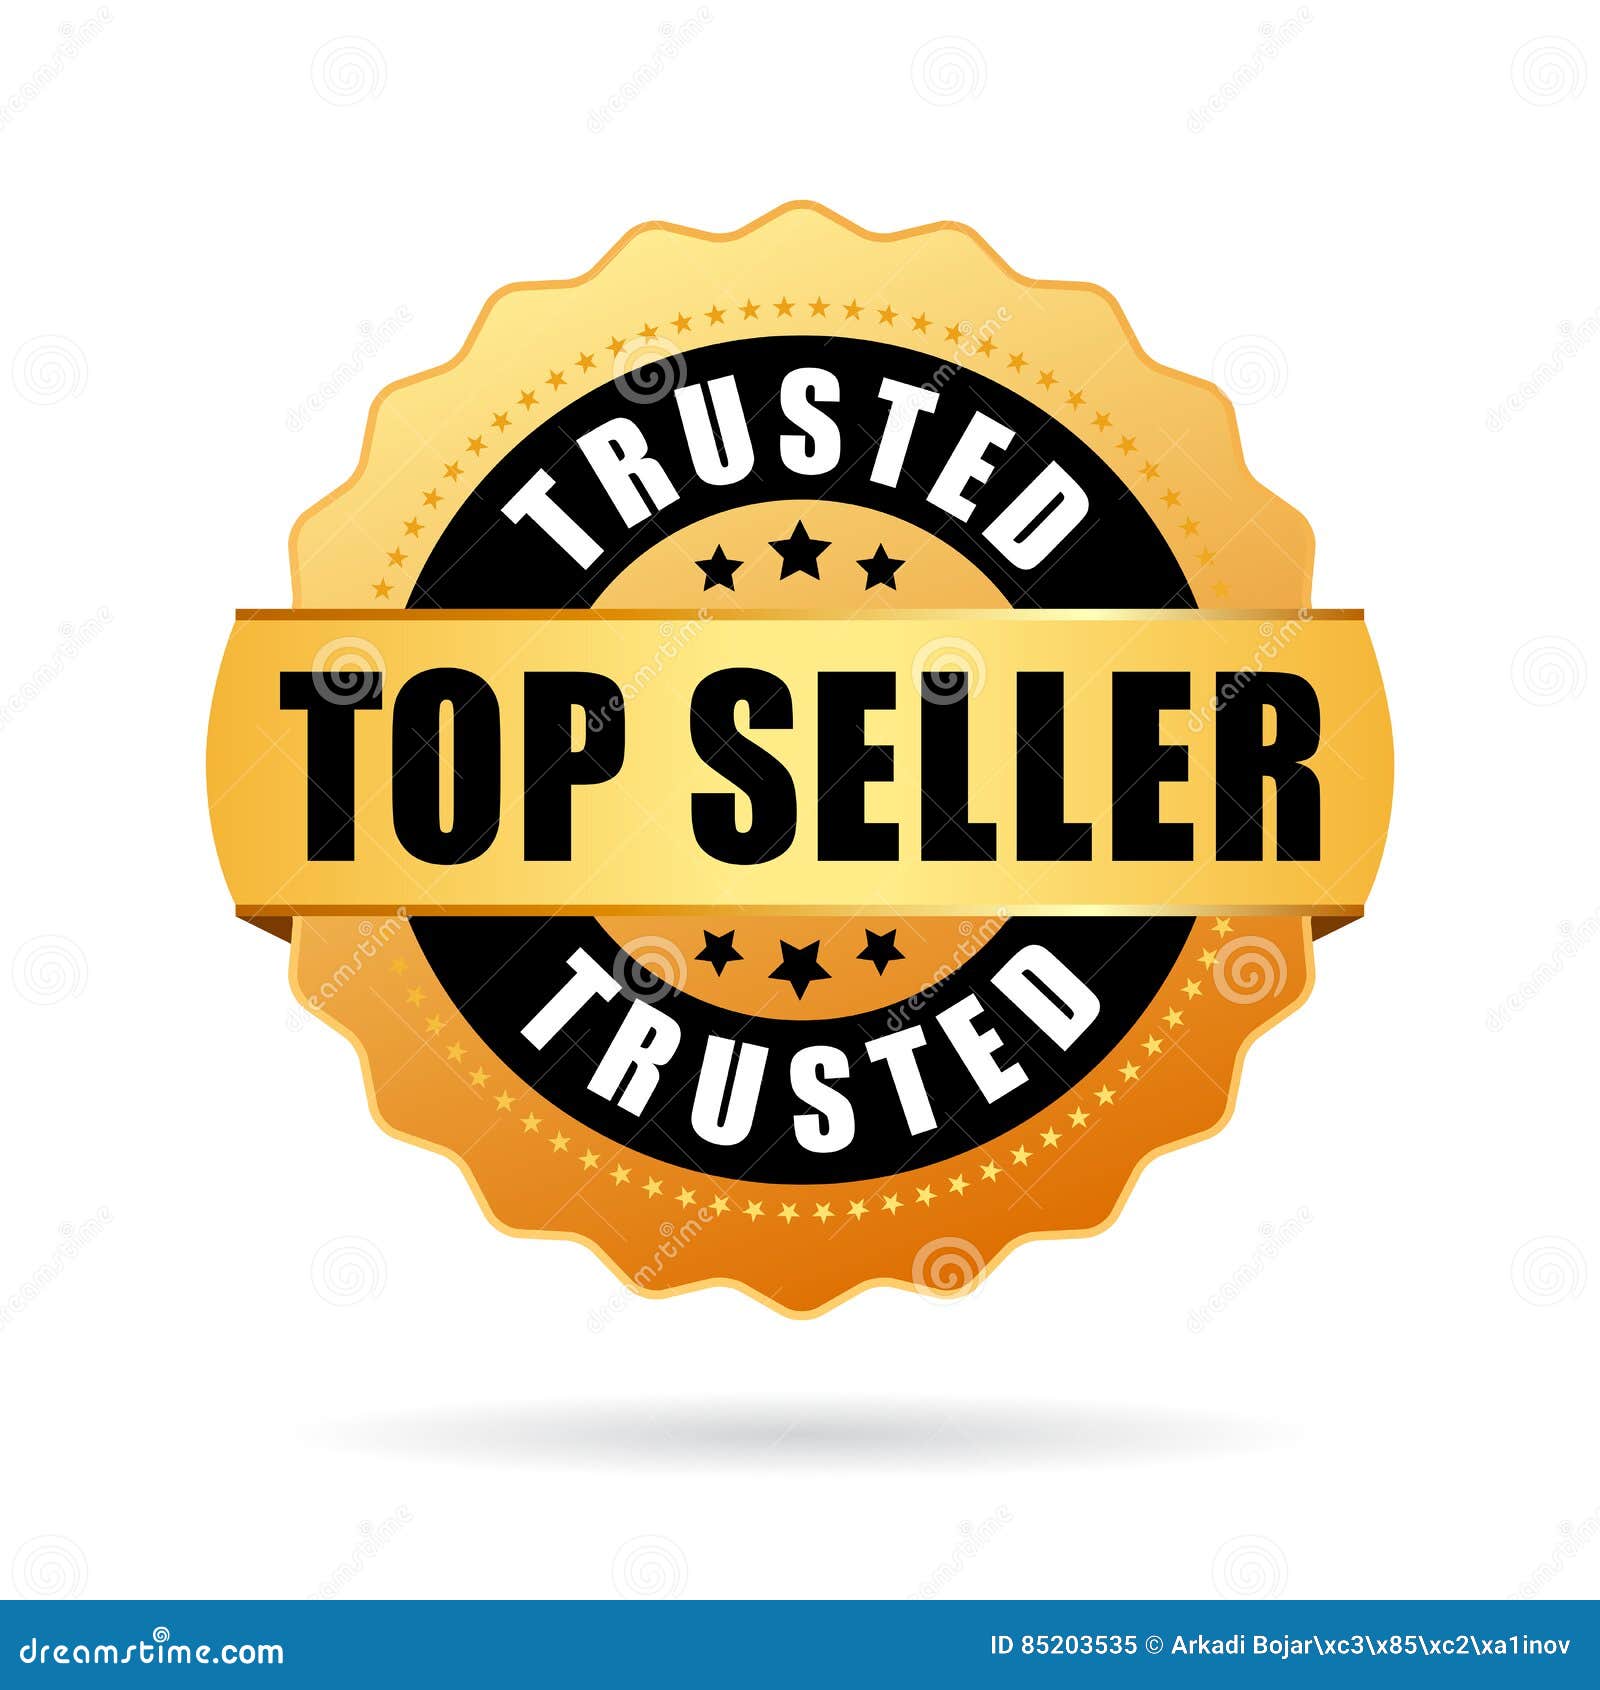 https://thumbs.dreamstime.com/z/trusted-top-seller-gold-vector-icon-isolated-white-background-85203535.jpg